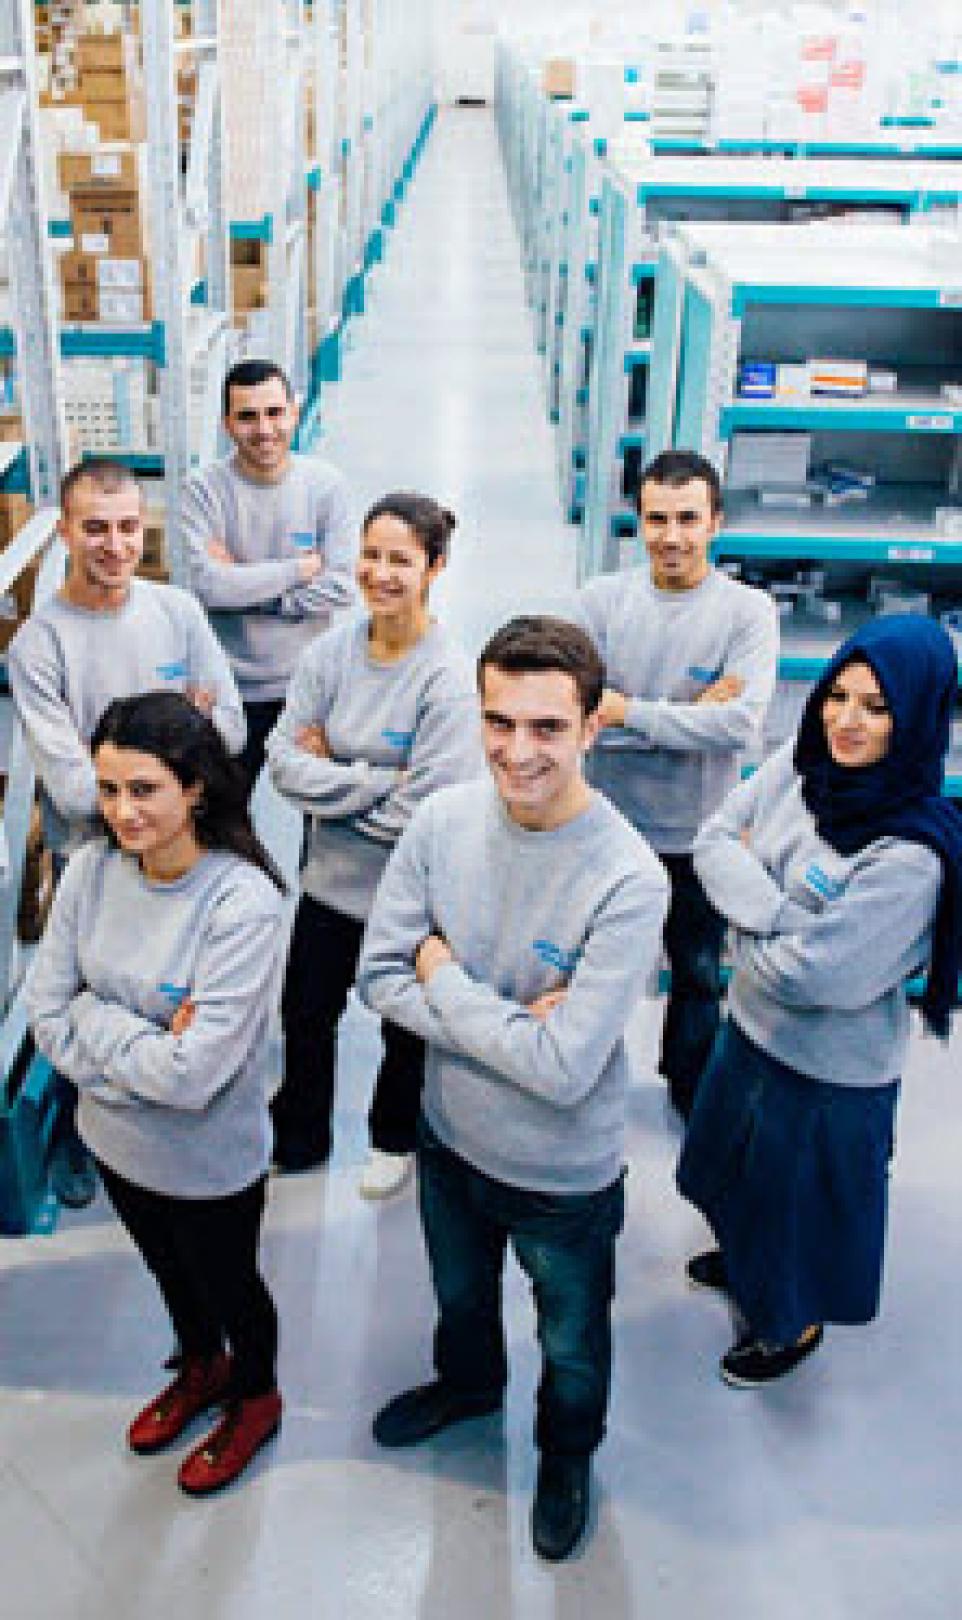  Alliance Healthcare employees pose for a photograph in a warehouse in Turkey